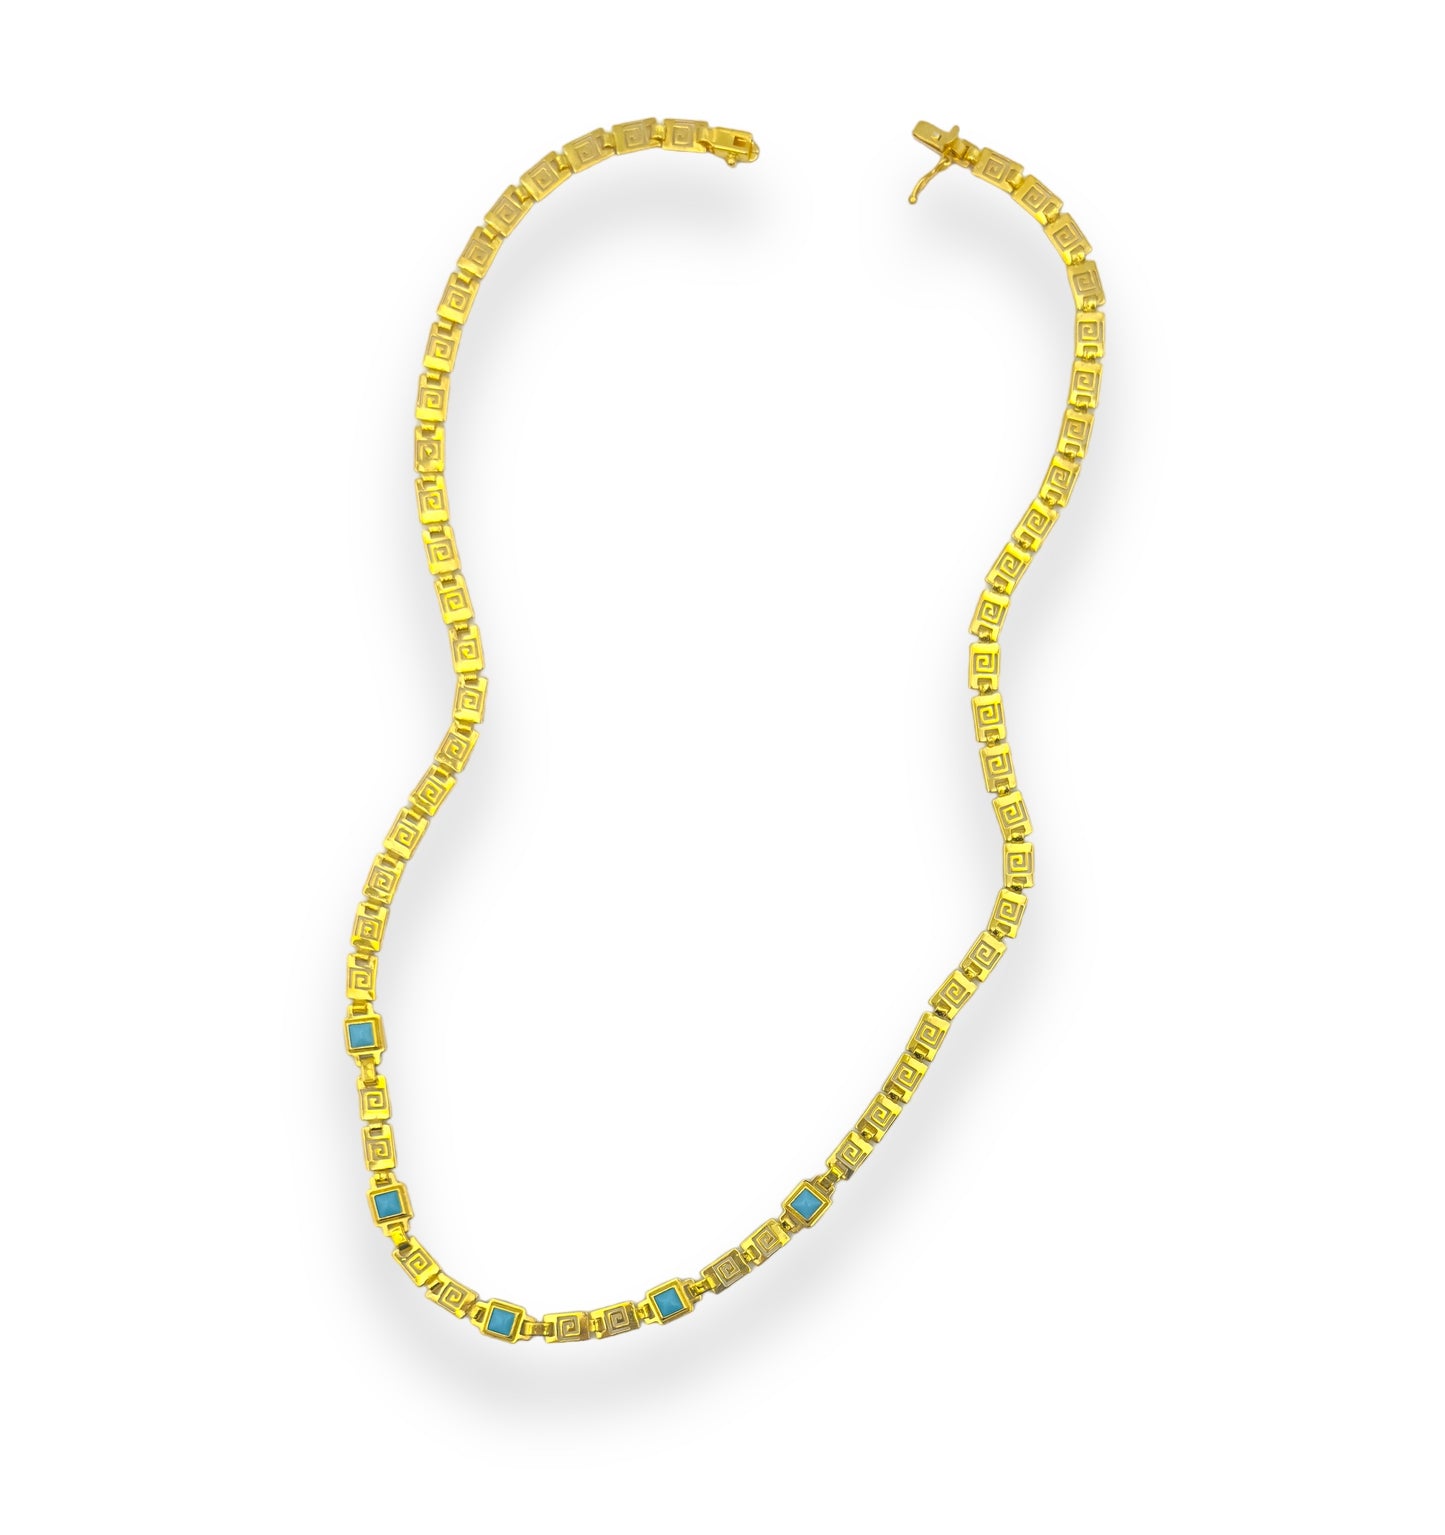 Silver Meander design necklace with Turquoise stones